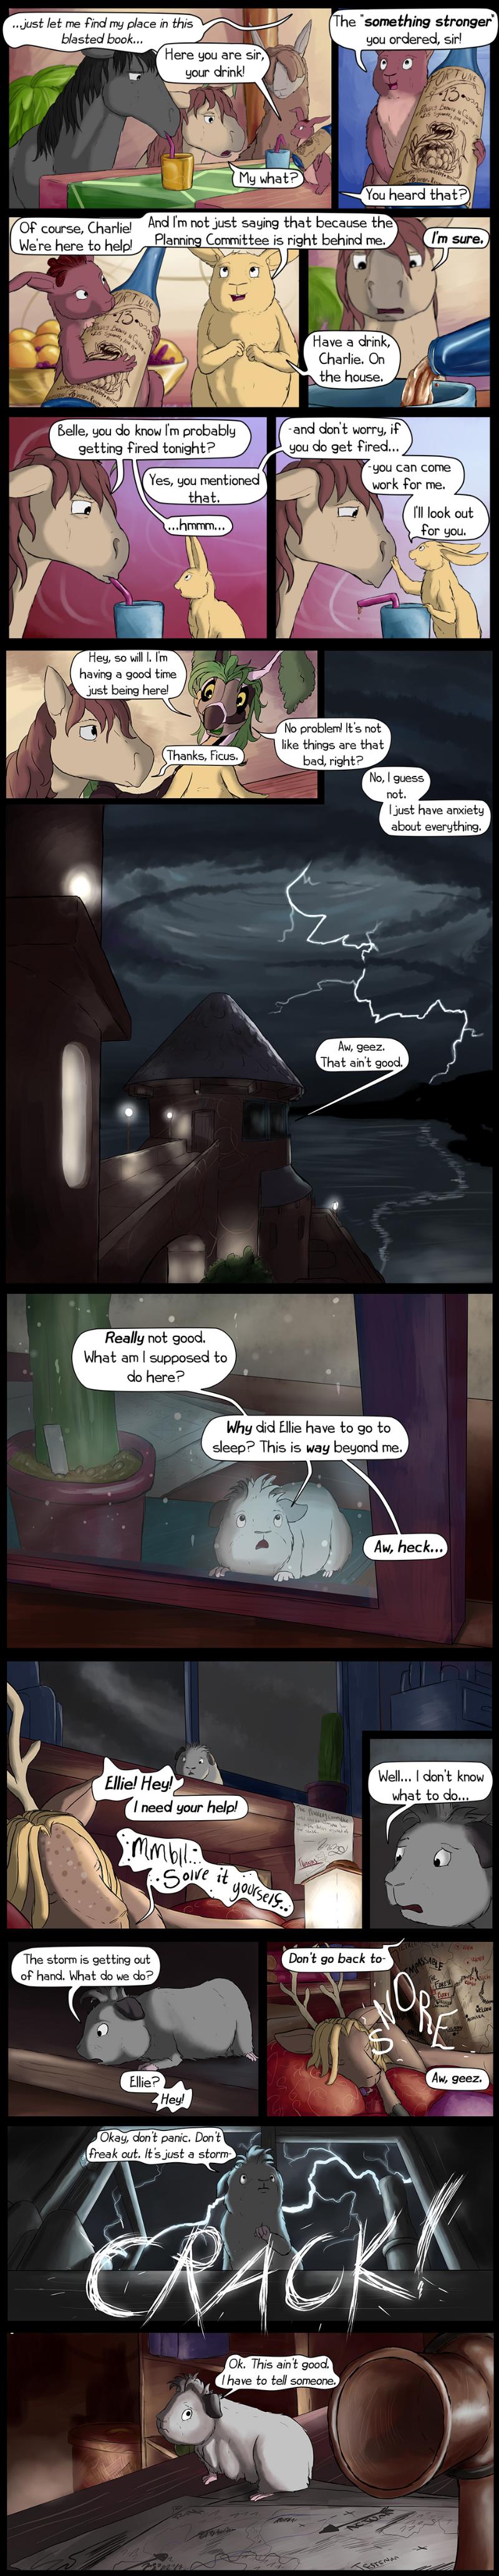 Page 5: Weather We Go Anywhere or Not